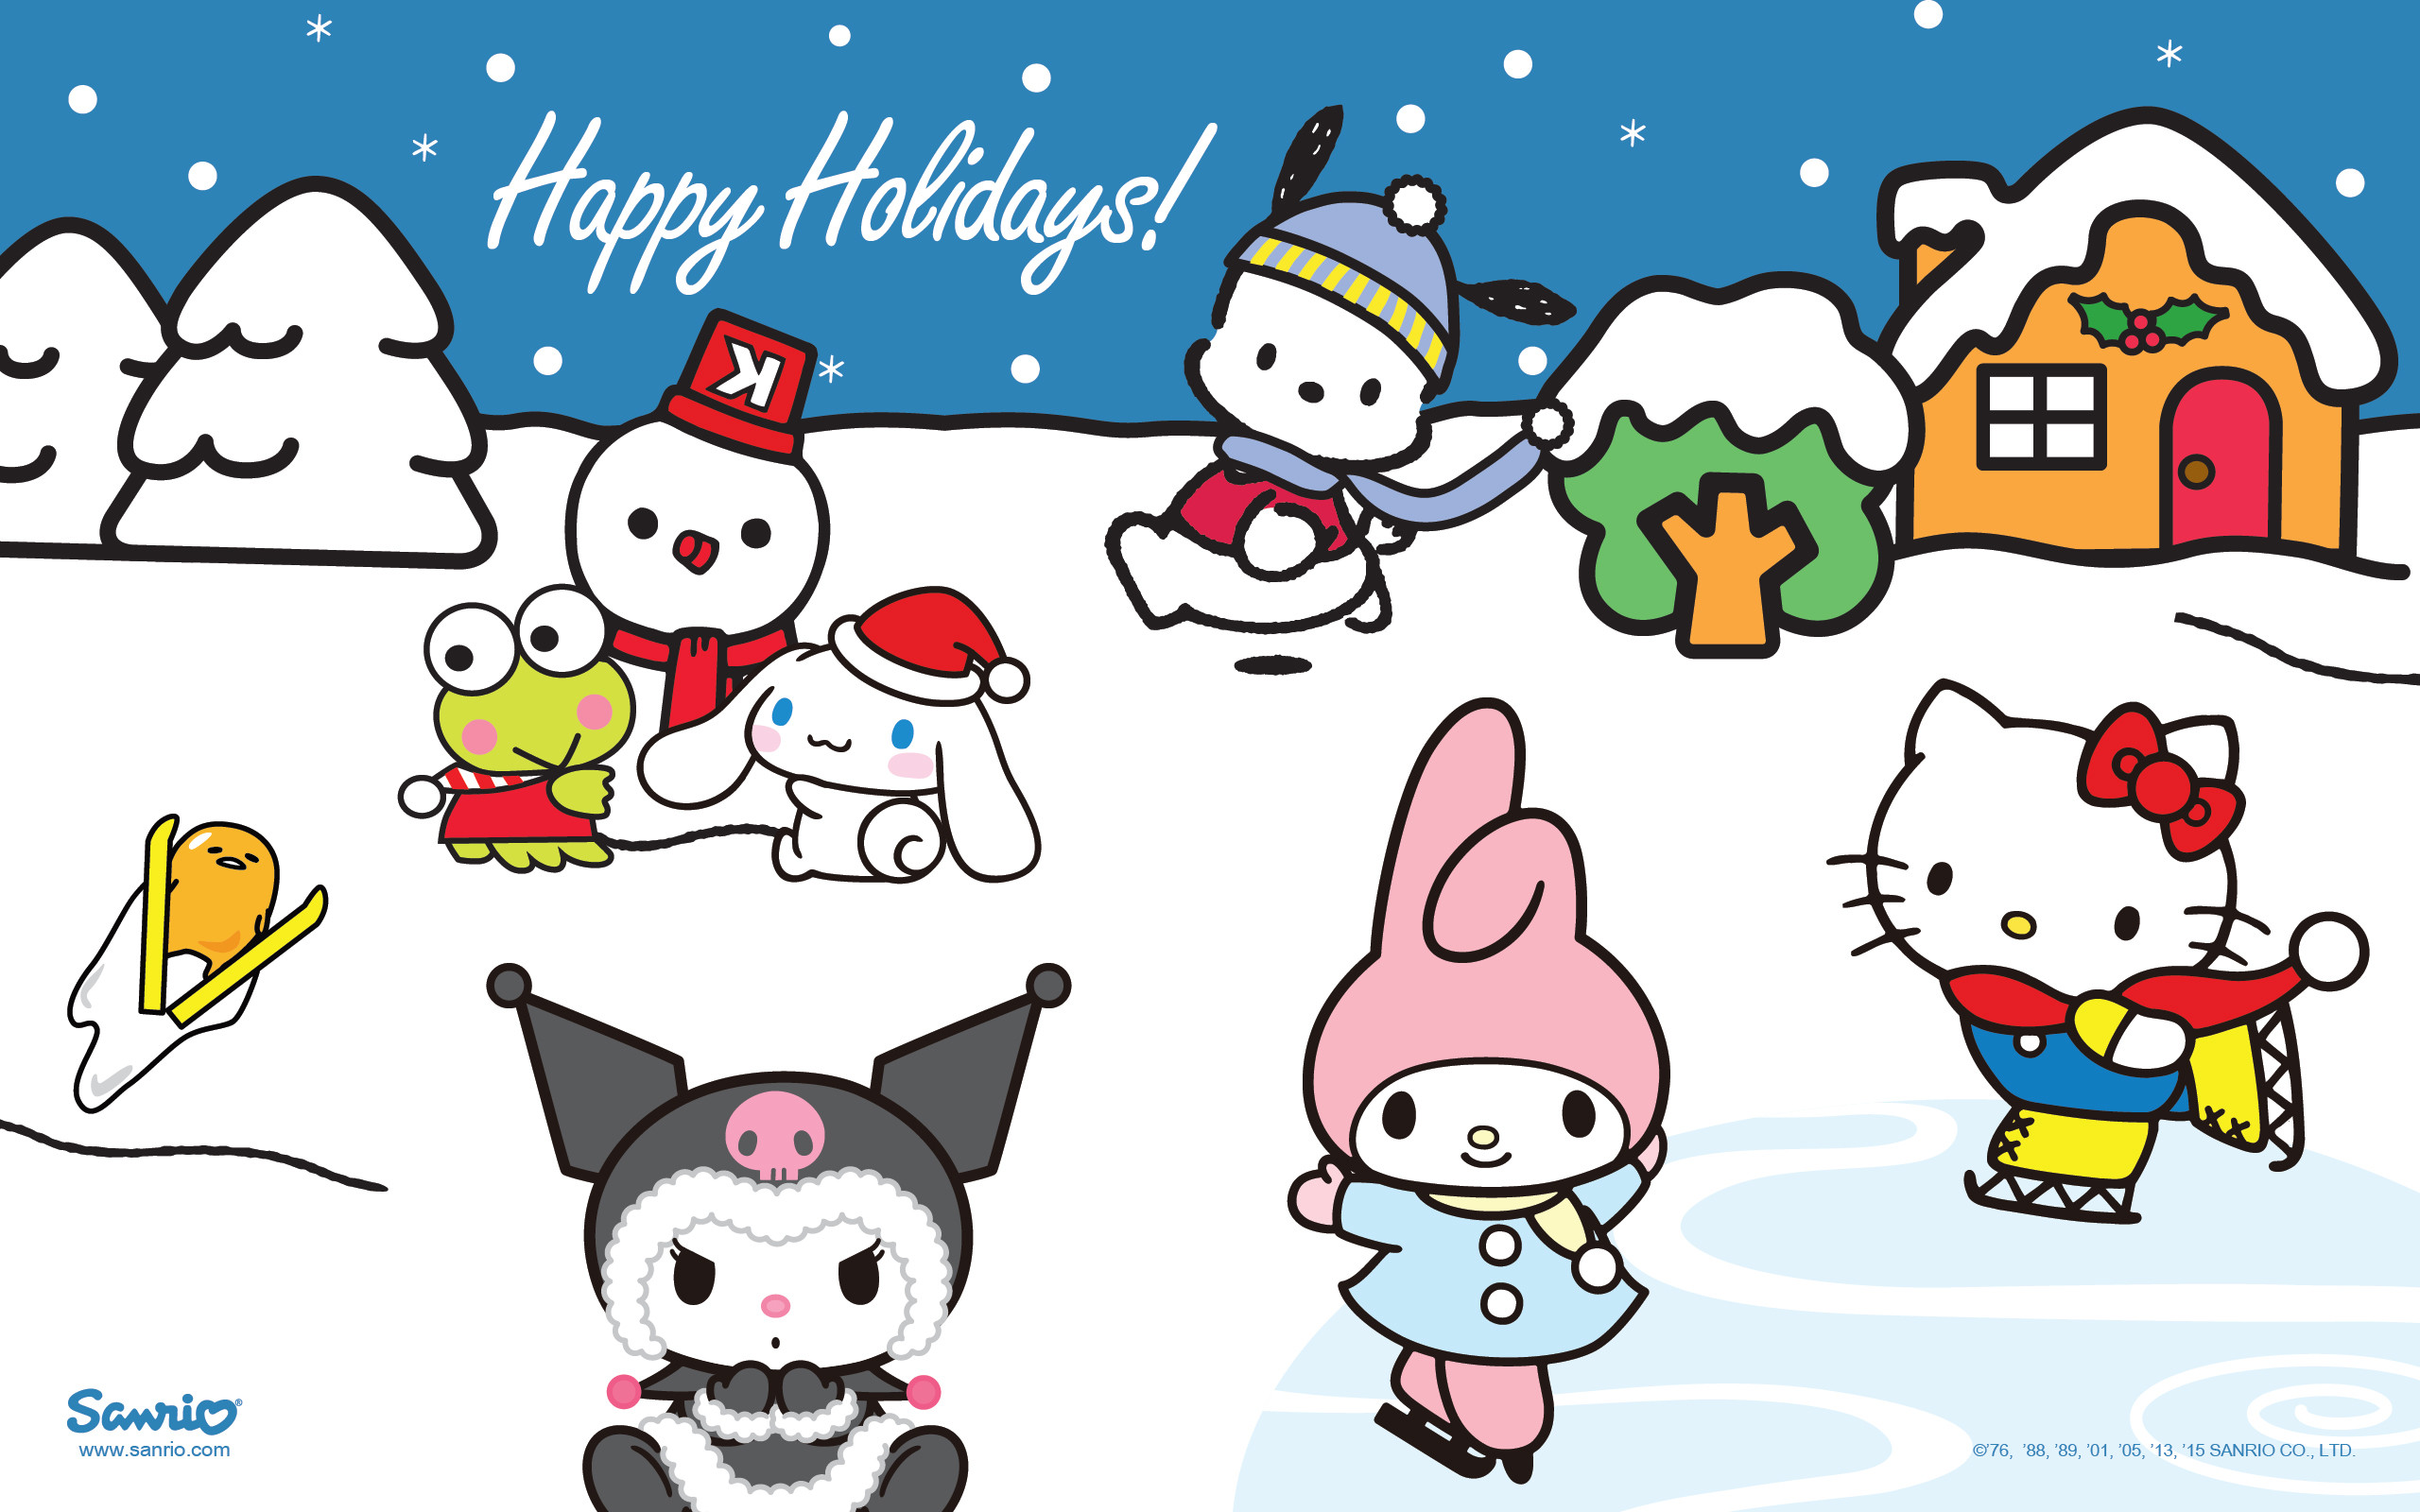 2560x1600 The official website for all things Sanrio - the official home of Hello  Kitty & Friends - games, events, characters, videos, shopping and more!